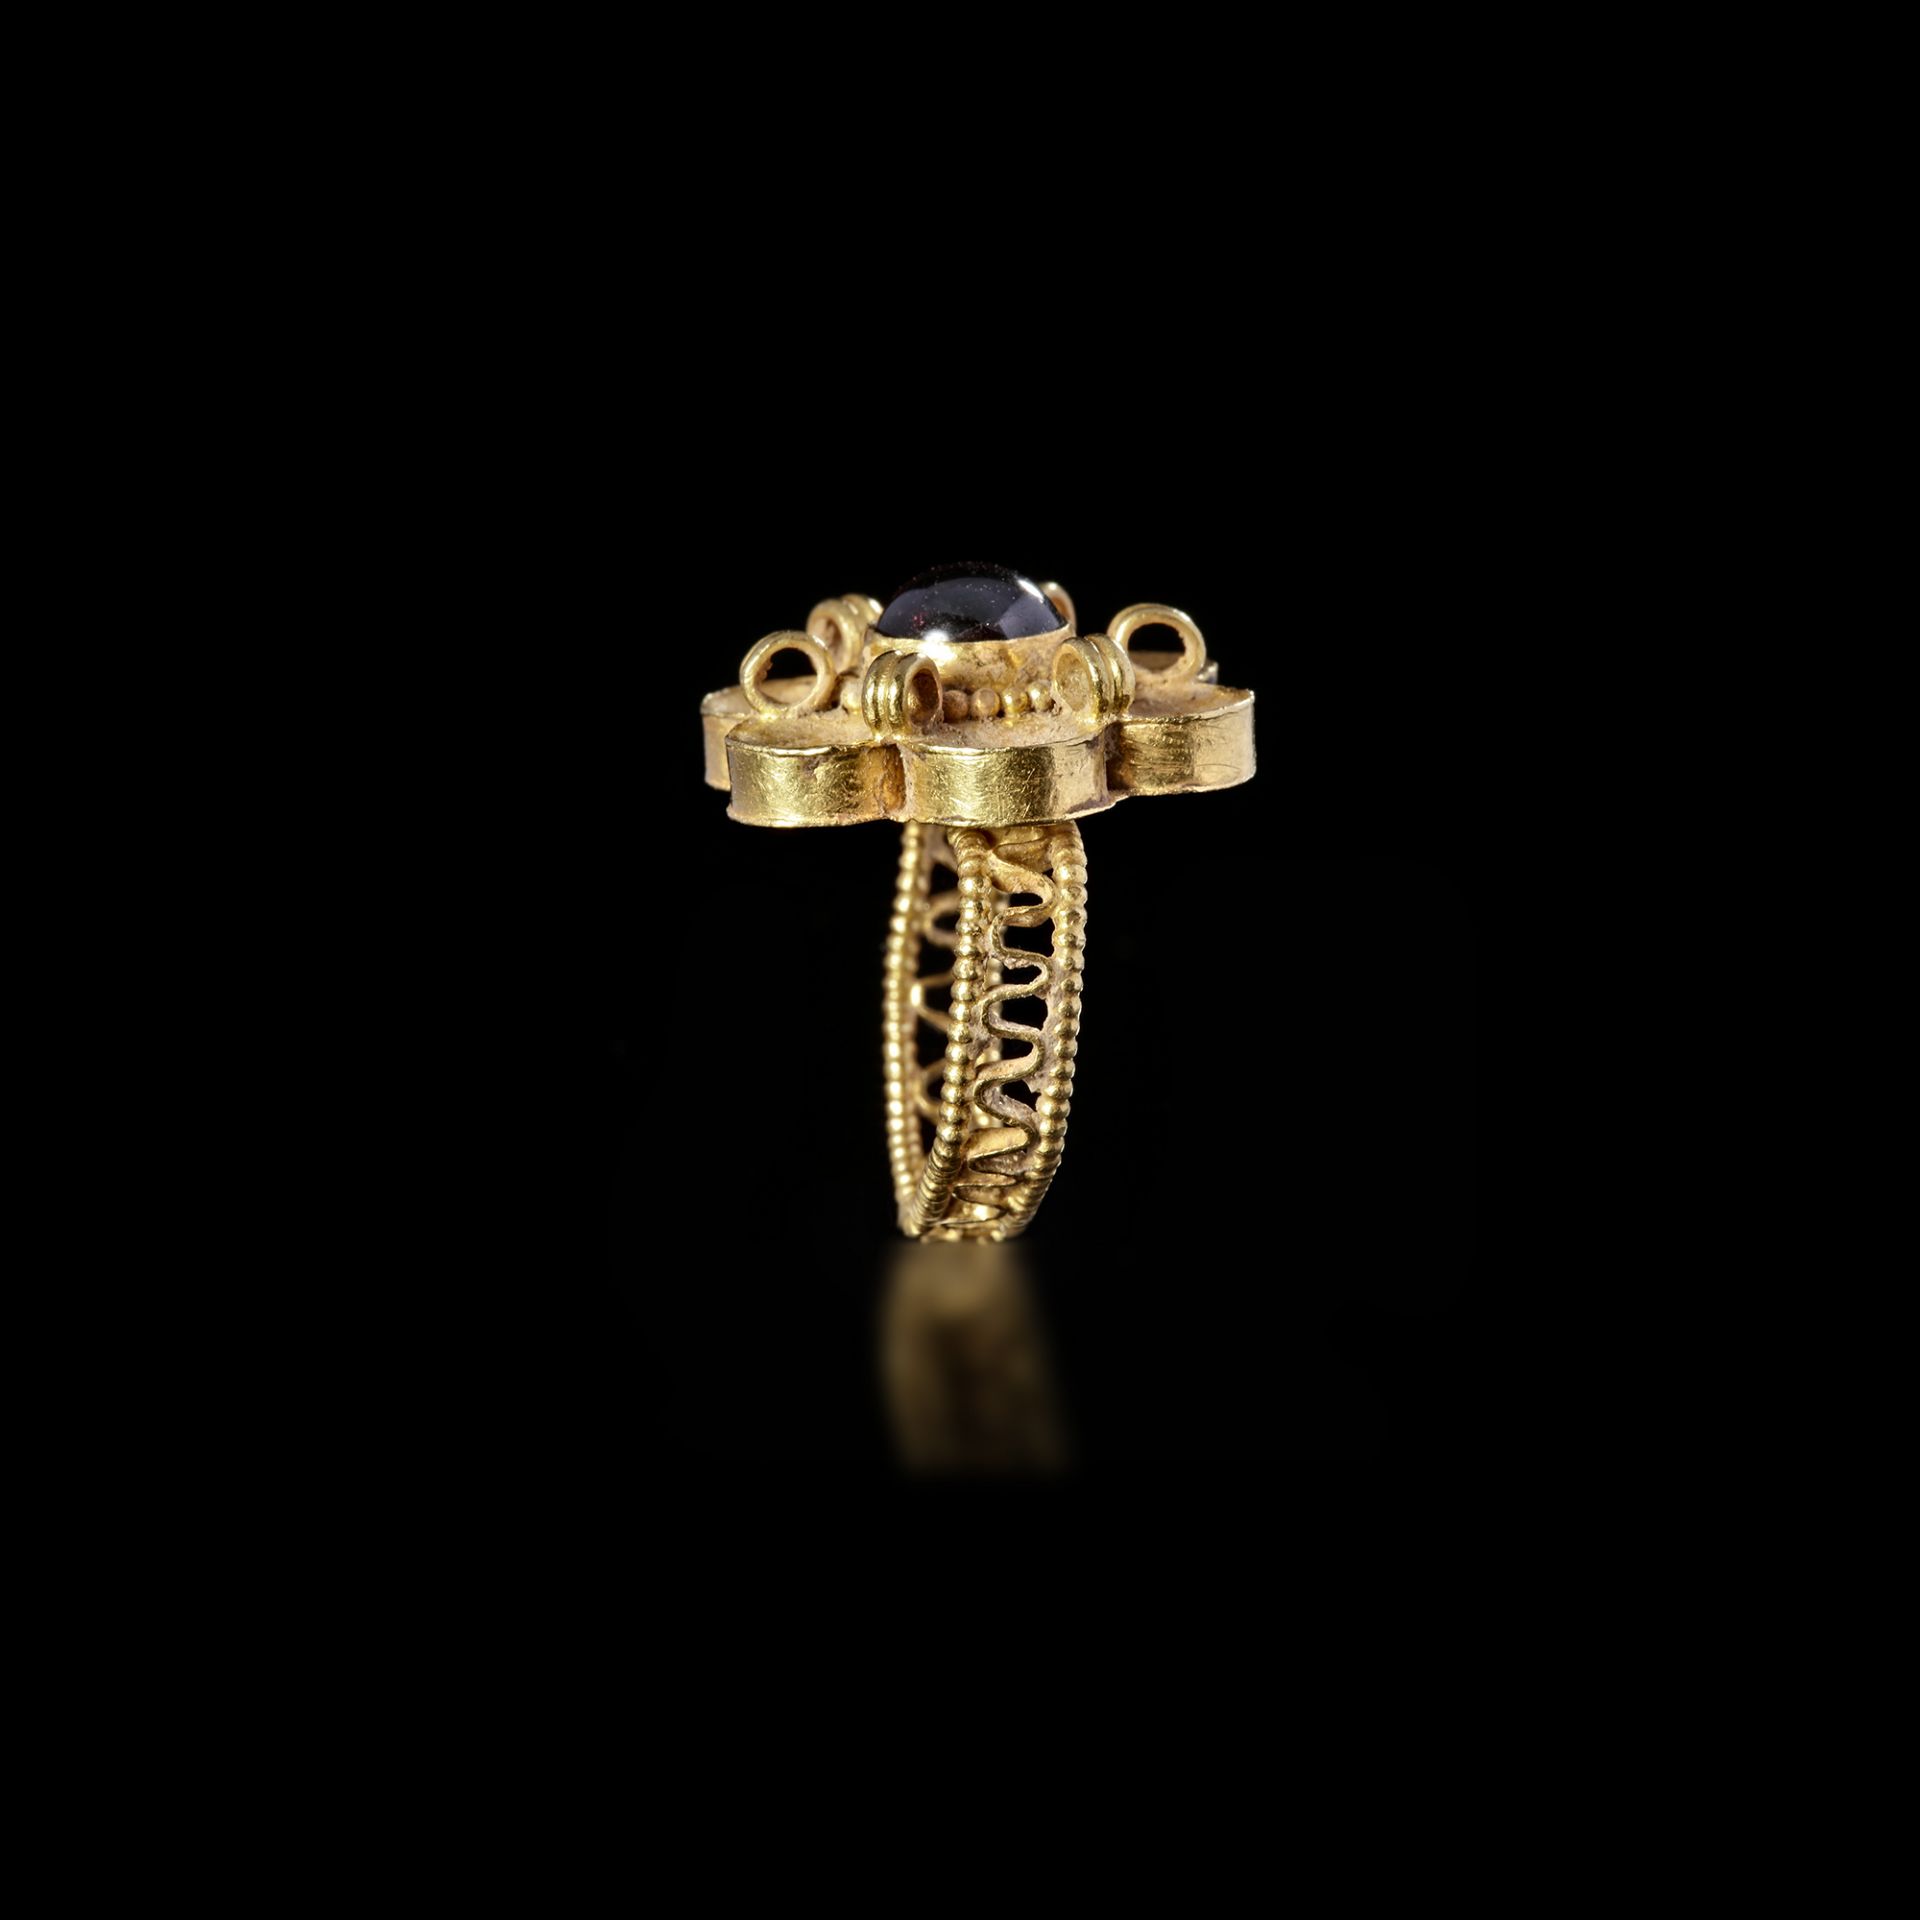 A LATE ROMAN/EARLY BYZANTINE GOLD RING WITH A GARNET, 5TH-6TH CENTURY AD - Image 4 of 4